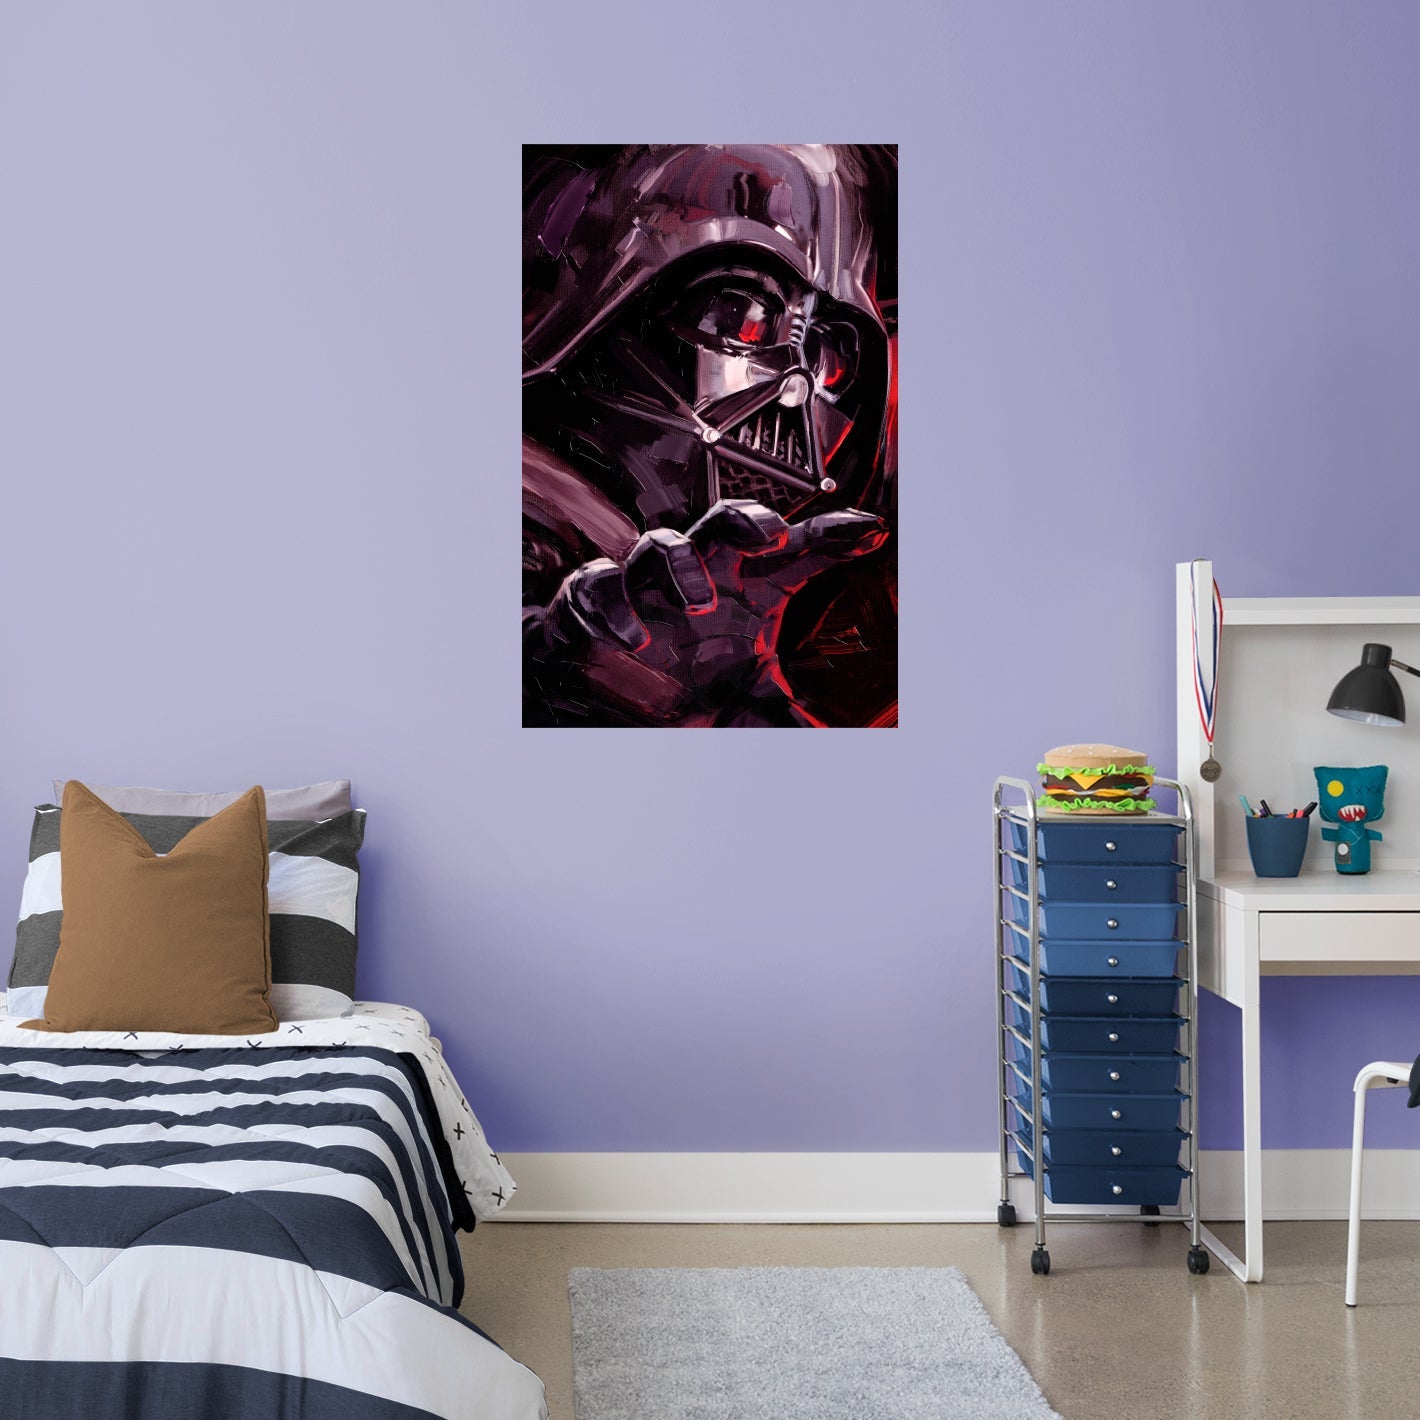 Obi-Wan Kenobi: Darth Vader Force Poster - Officially Licensed Star Wars Removable Adhesive Decal